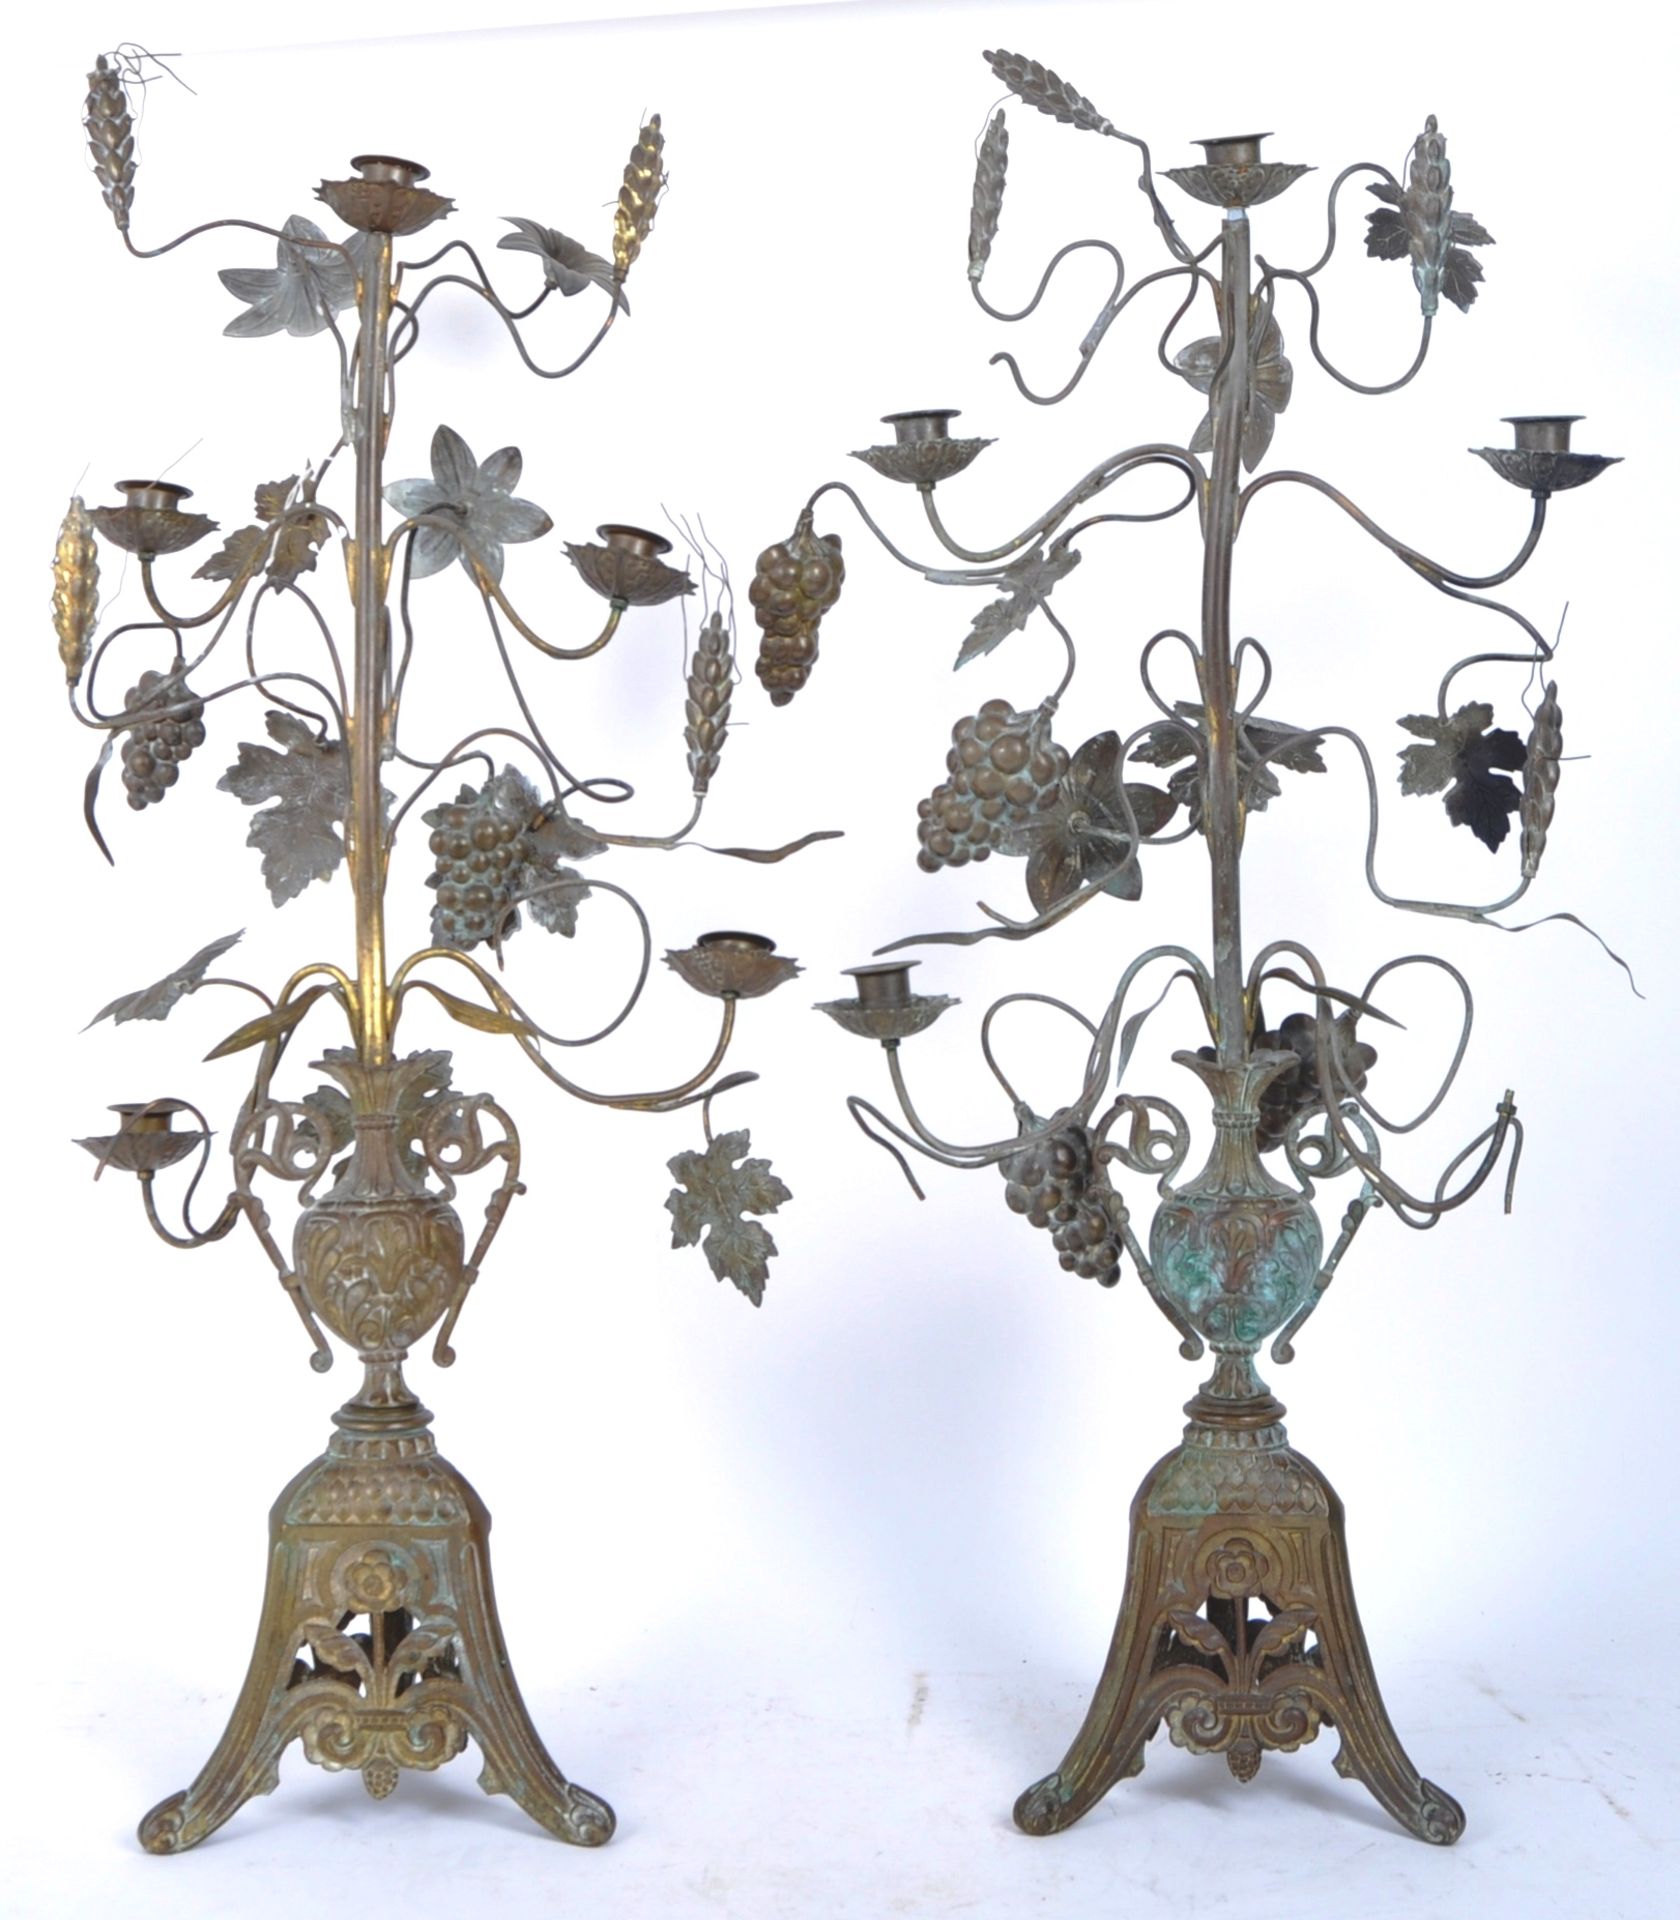 PAIR OF EARLY 20TH CENTURY BRASS FRENCH CANDELABRAS - Image 2 of 6